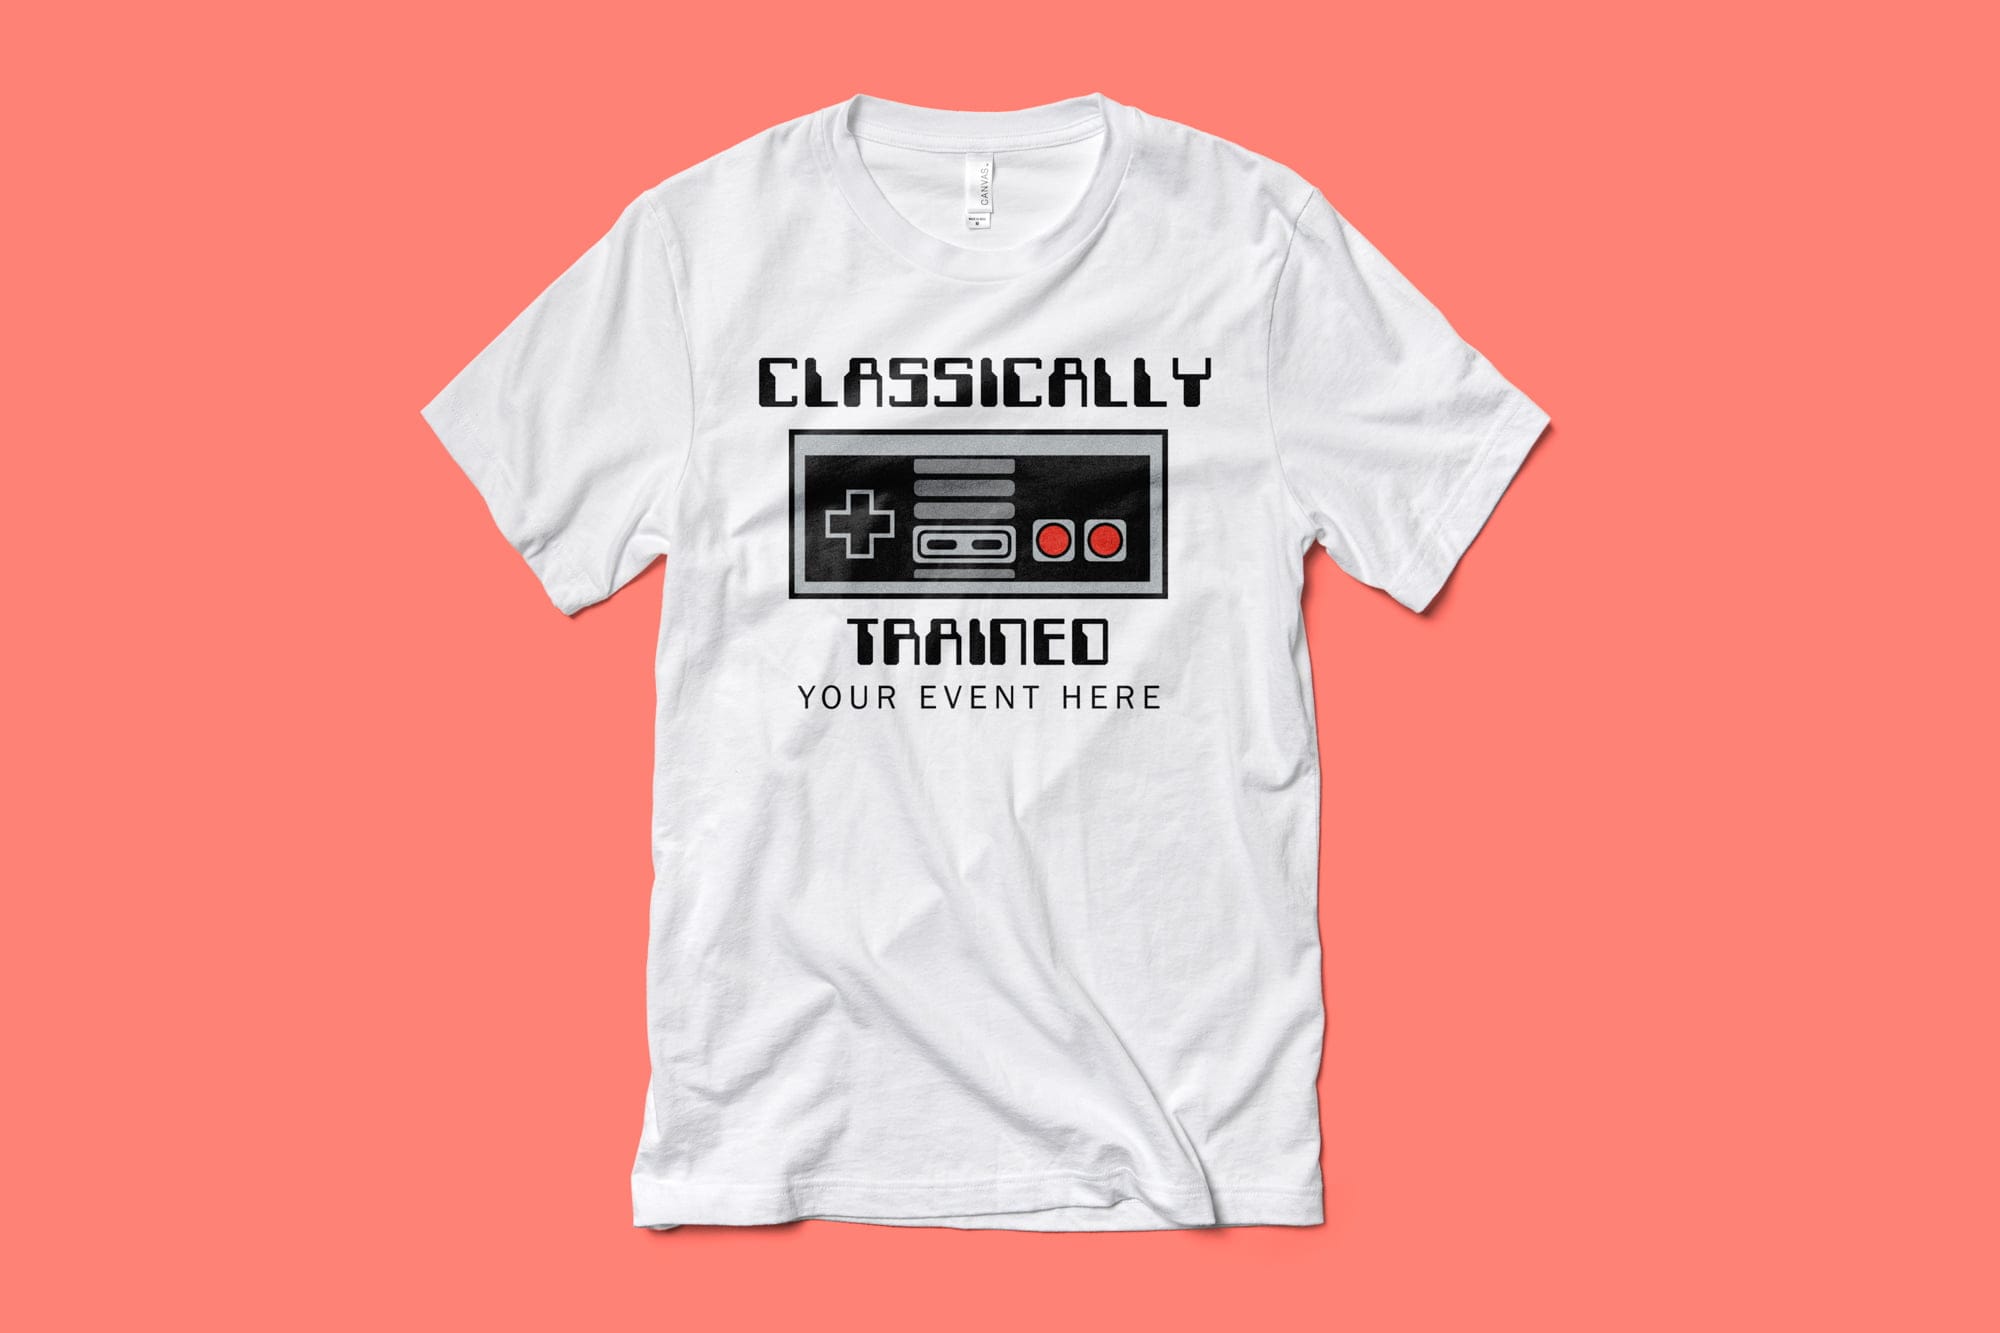 A white t-shirt that features a Nintendo controller and says "classically trained".